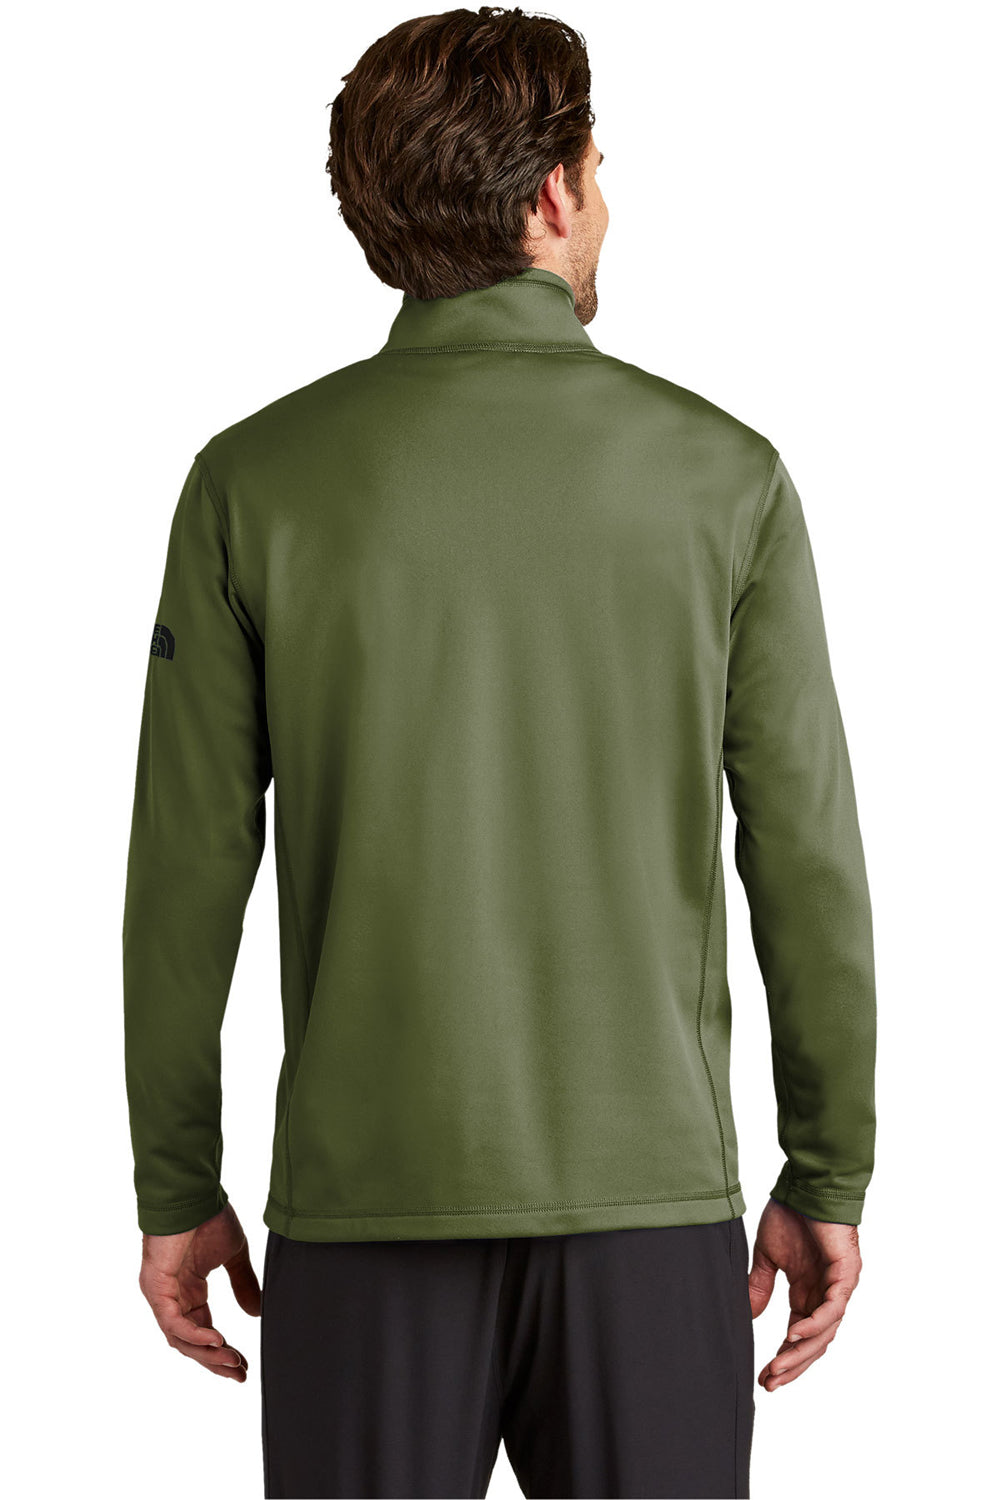 THE NORTH FACE TKA Attitude 1/4 Zip Fleece Chlorophyll Green XS at   Men's Clothing store